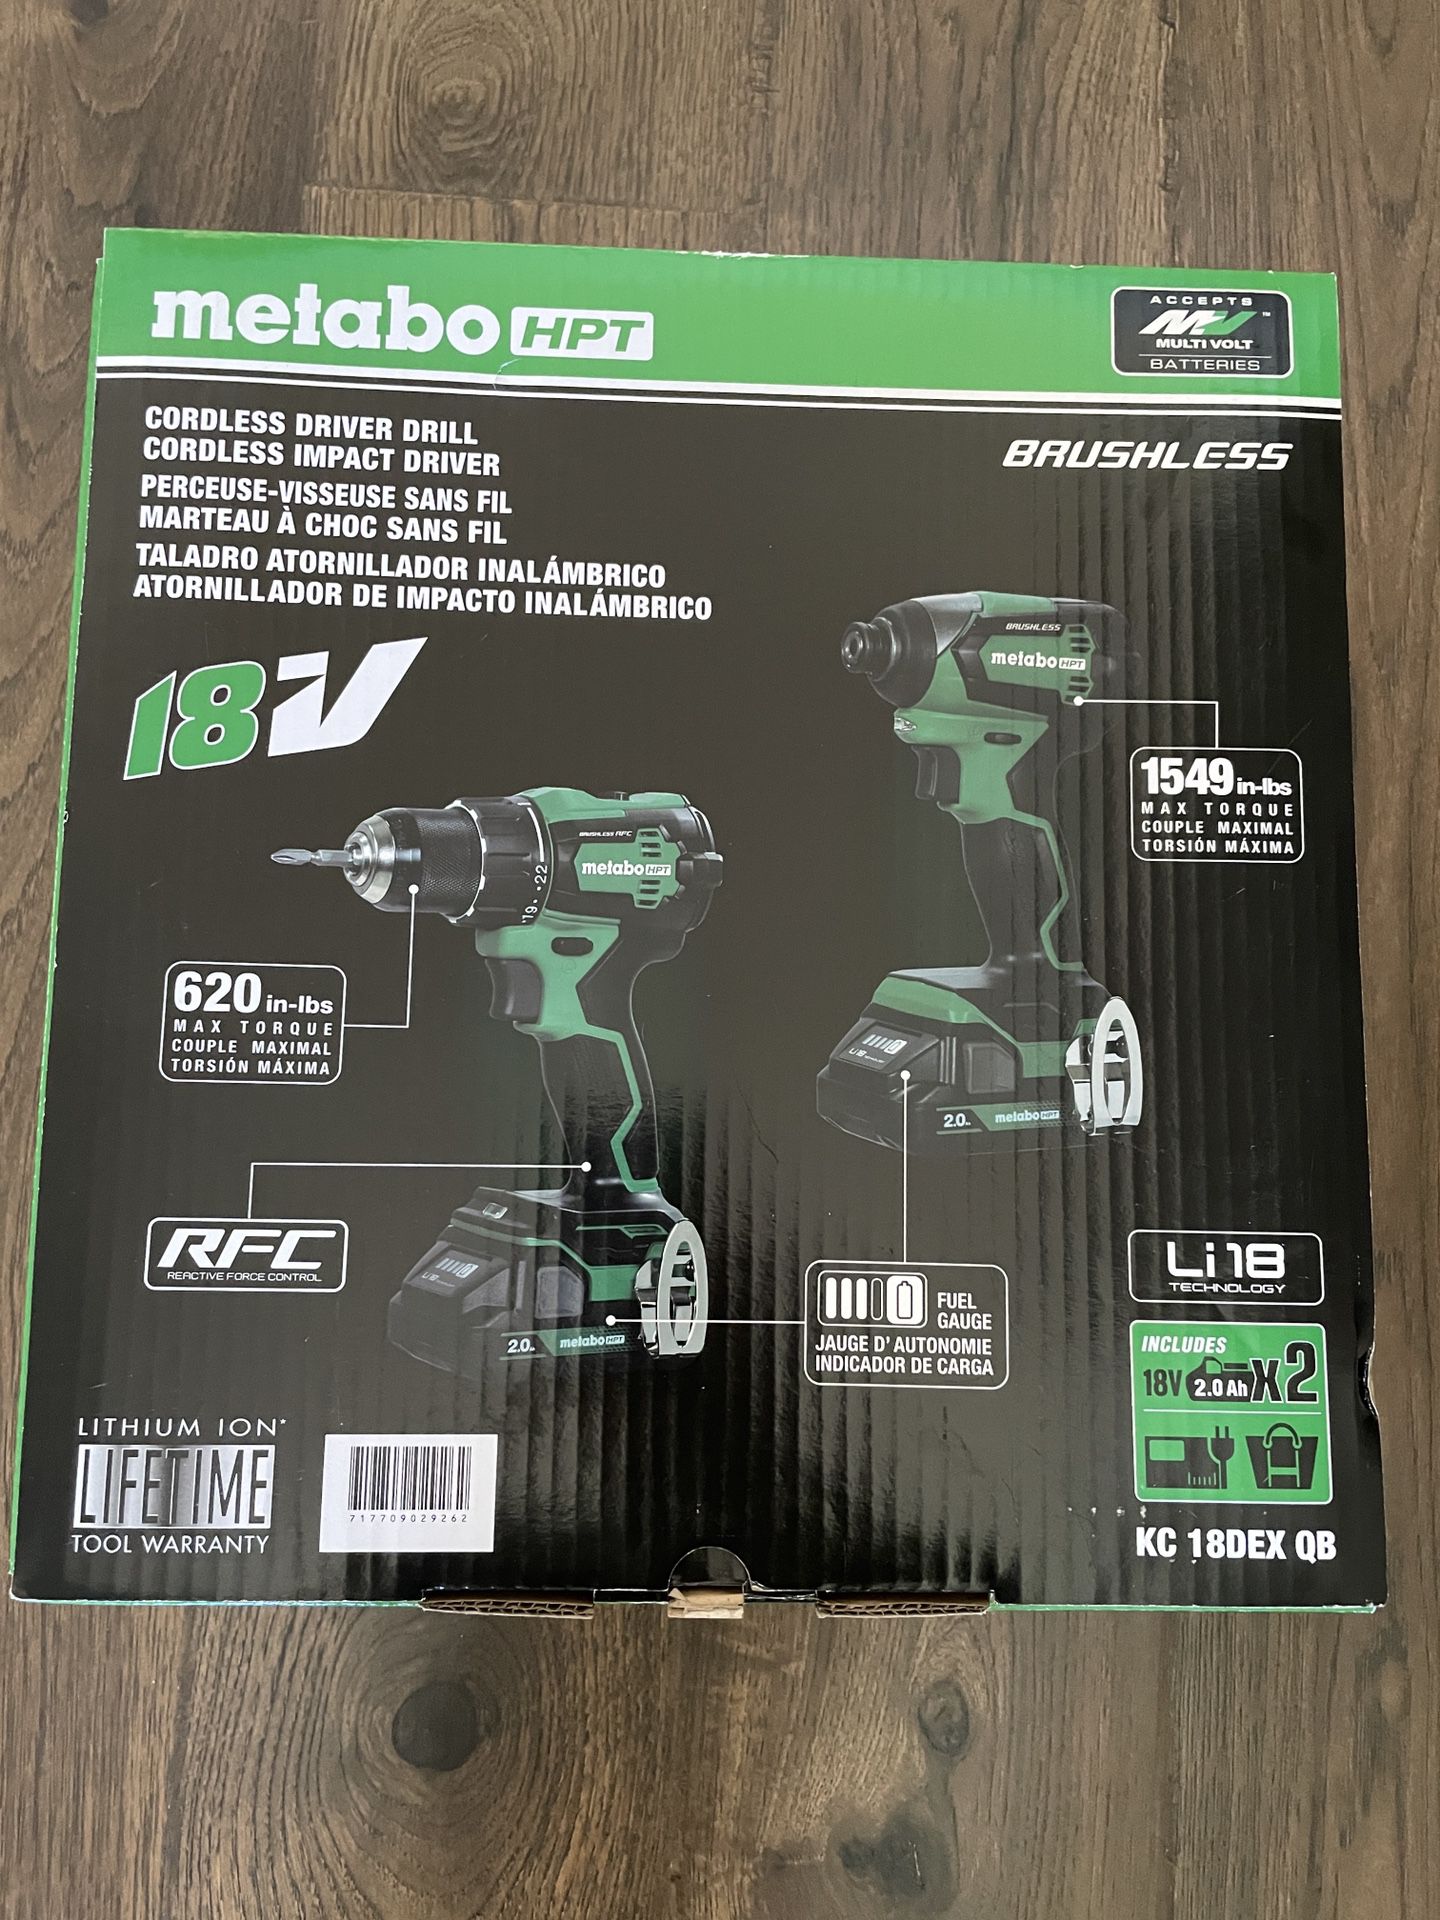 Metabo HPT Hitachi 18v Drill And Impact Driver 2x Battery Combo With Bag